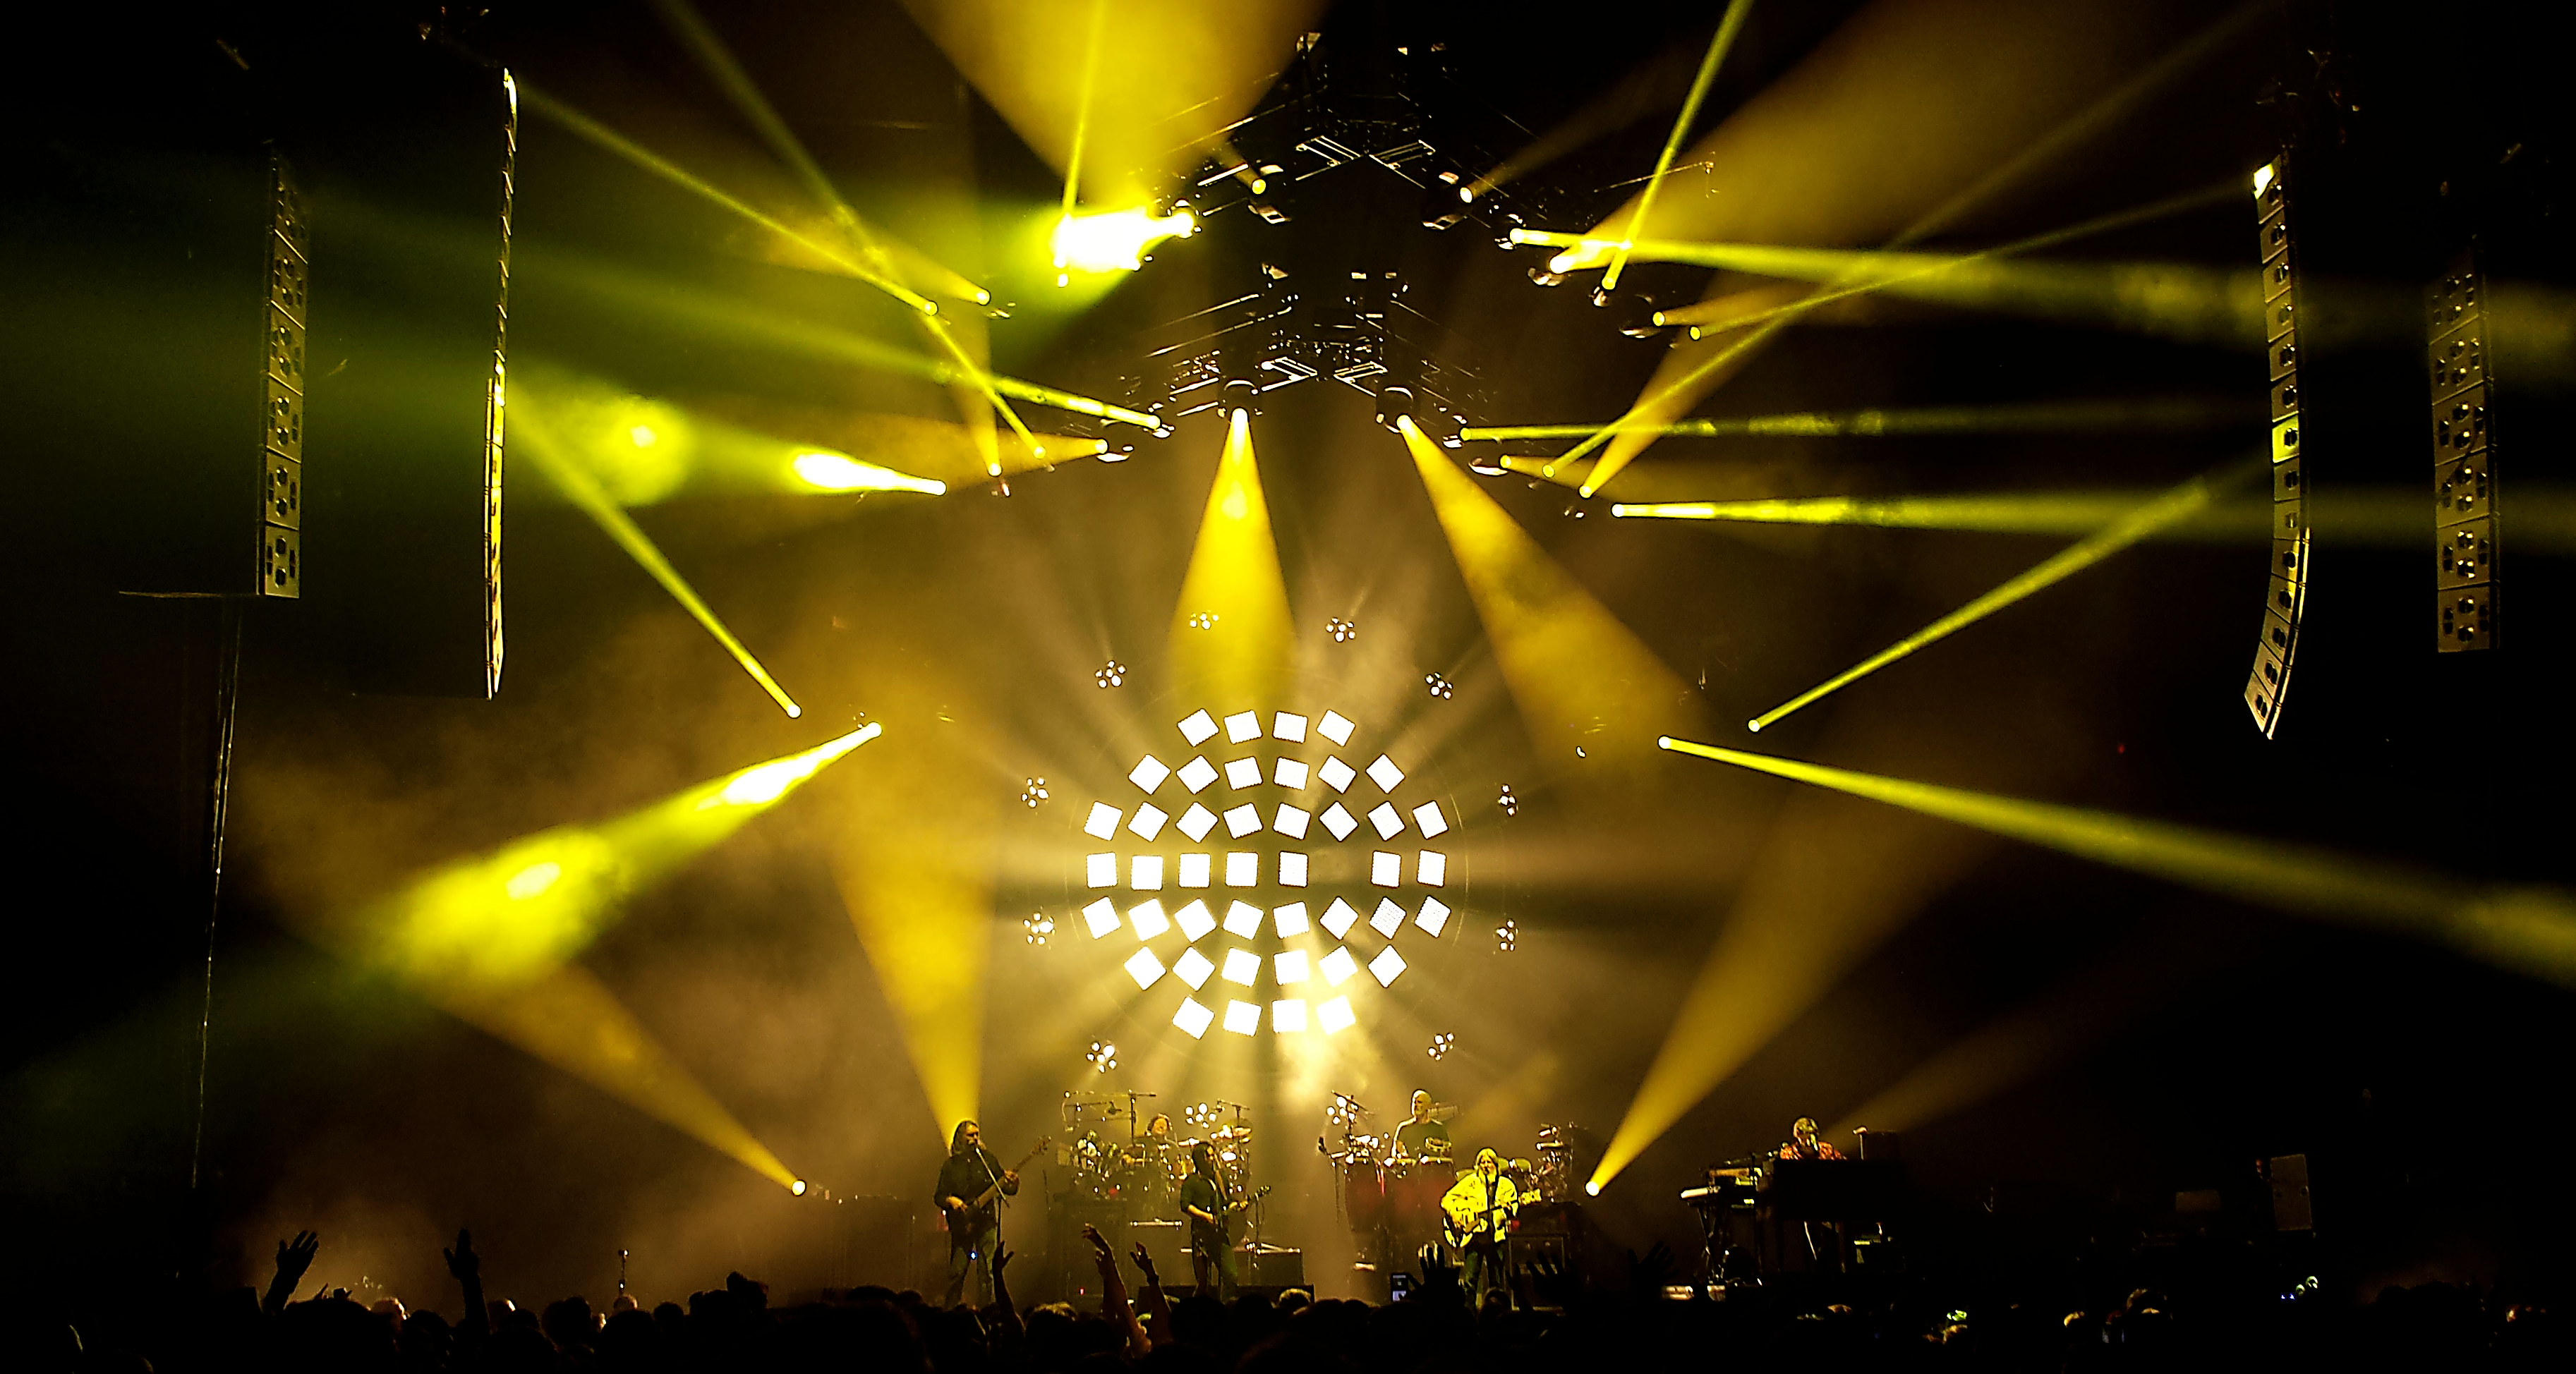 The String Cheese Incident from NYE 2016 run at the 1st Bank Center in Broomfield, Colorado, just outside of Denver, on December 29, 2016. Photo by: Matthew McGuire